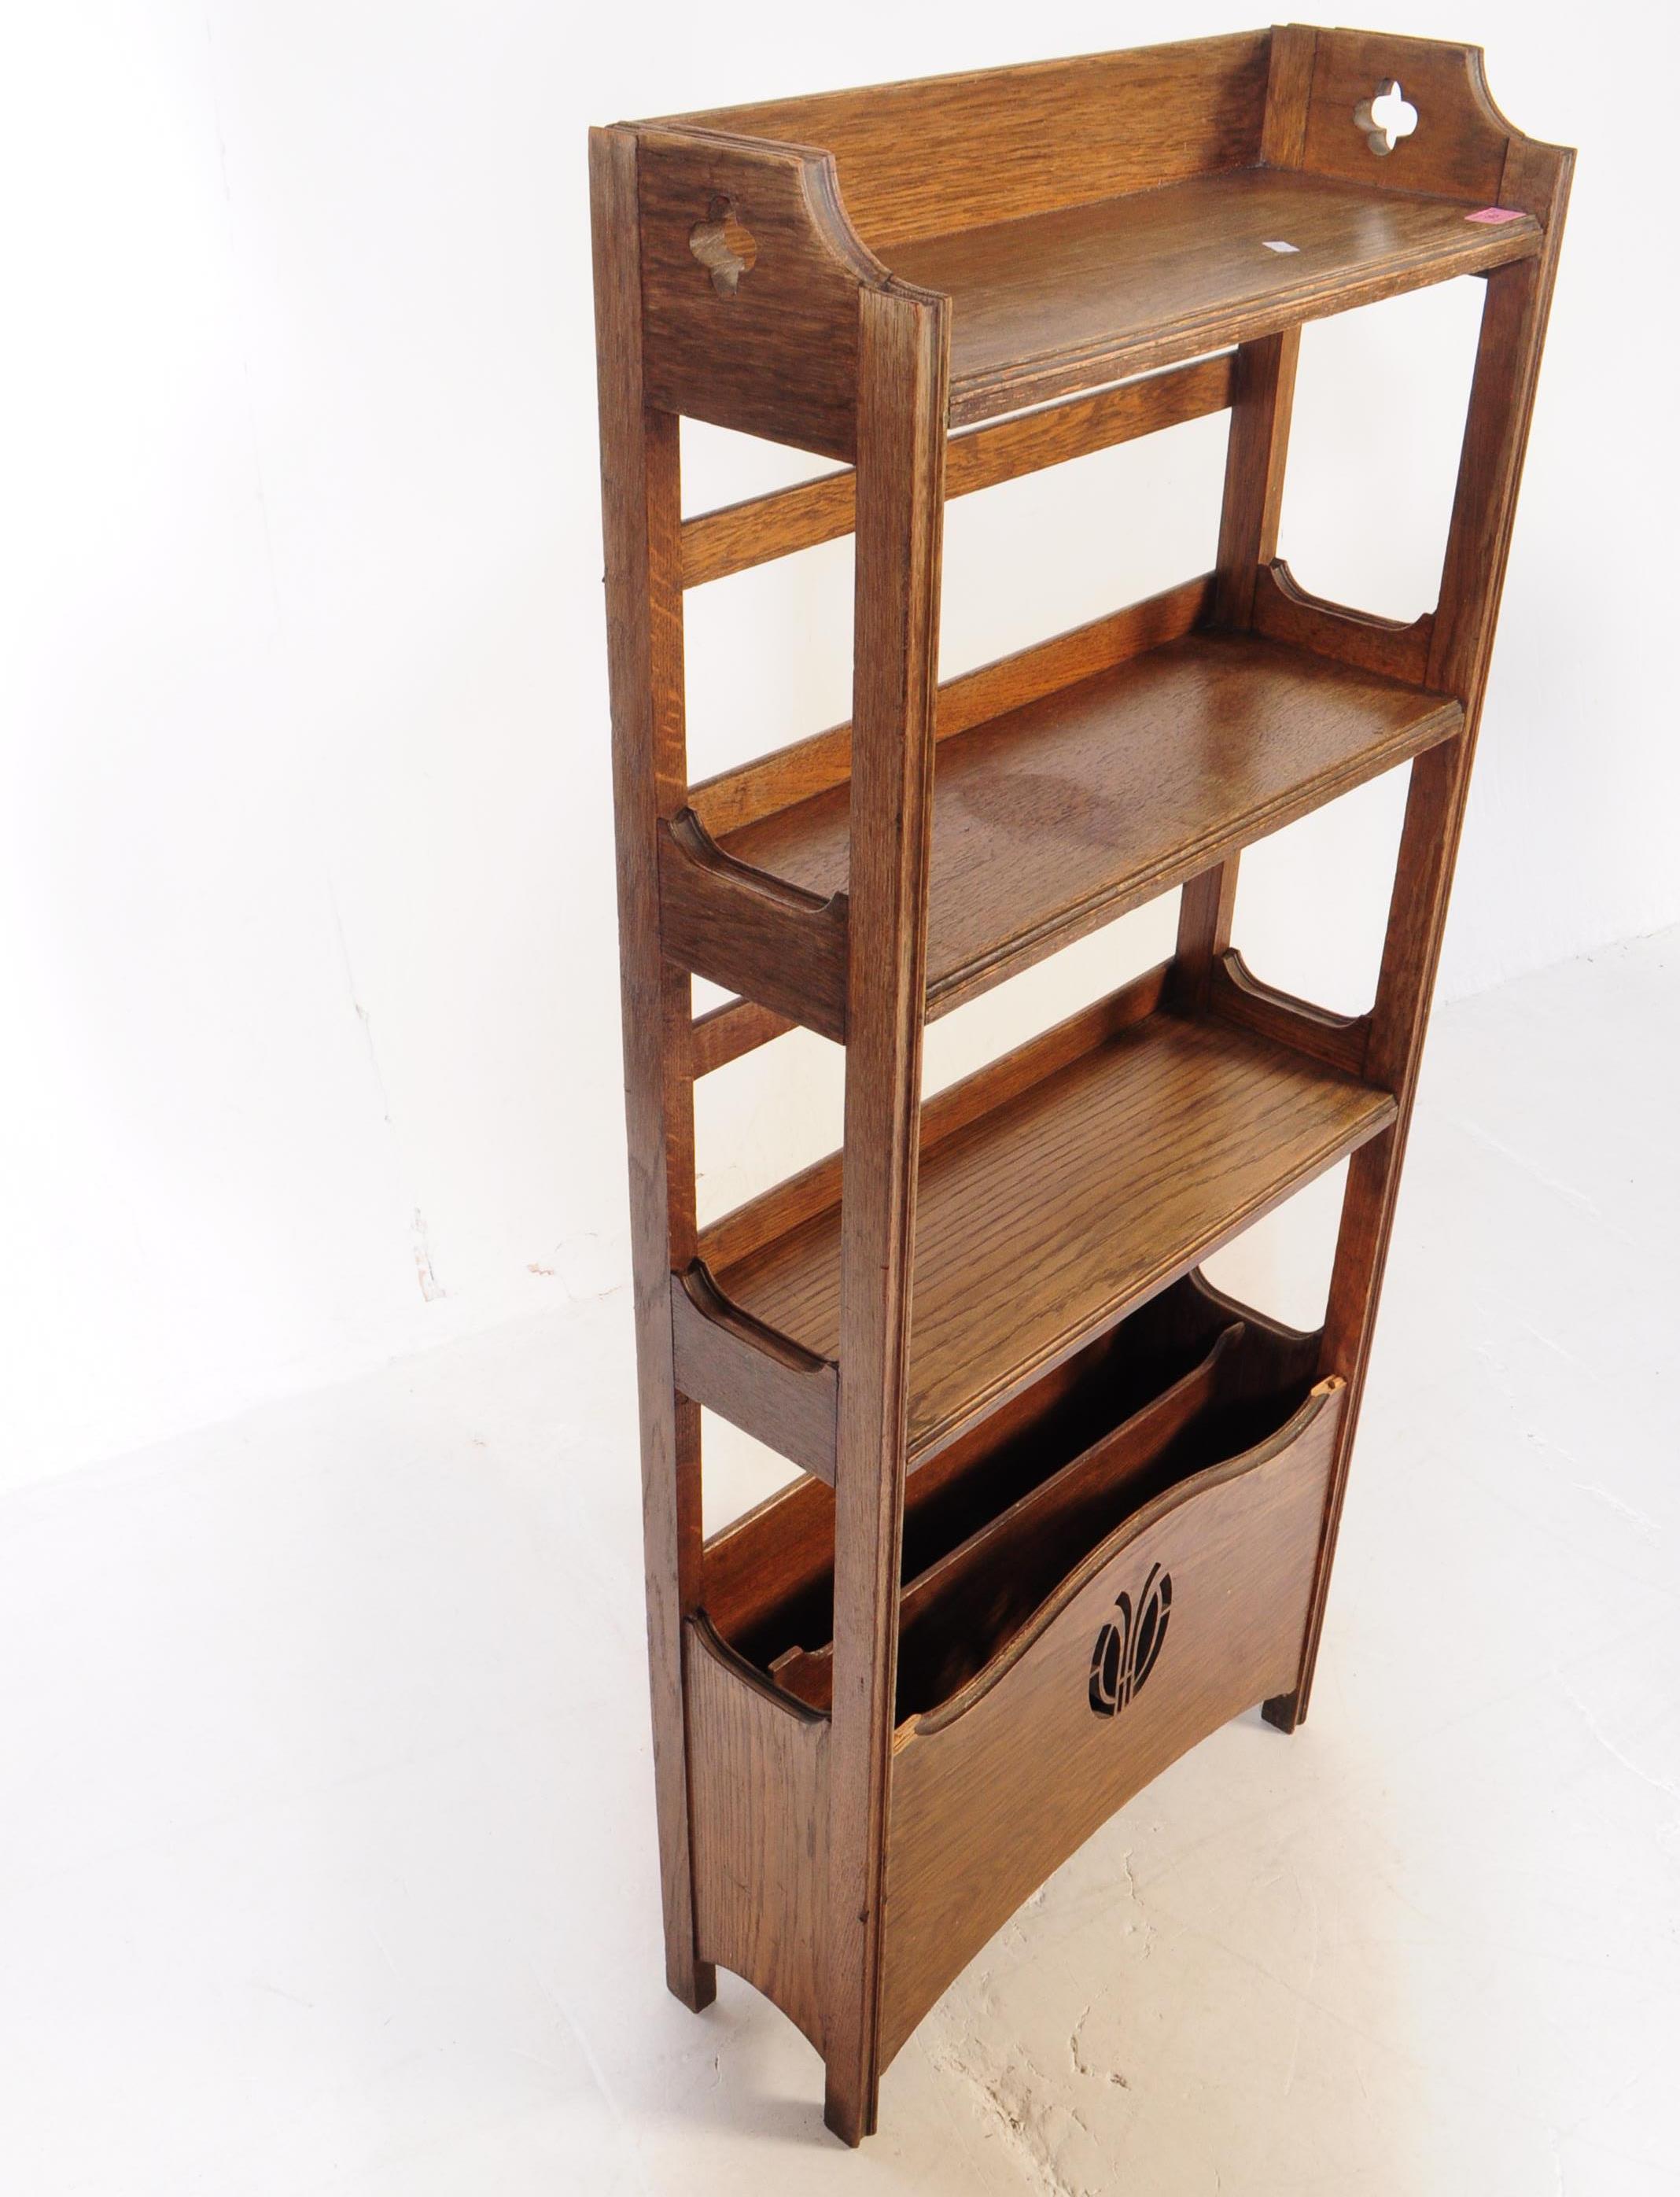 LIBERTY OF LONDON - EARLY 20TH CENTURY 1920S BOOKCASE - Image 3 of 5